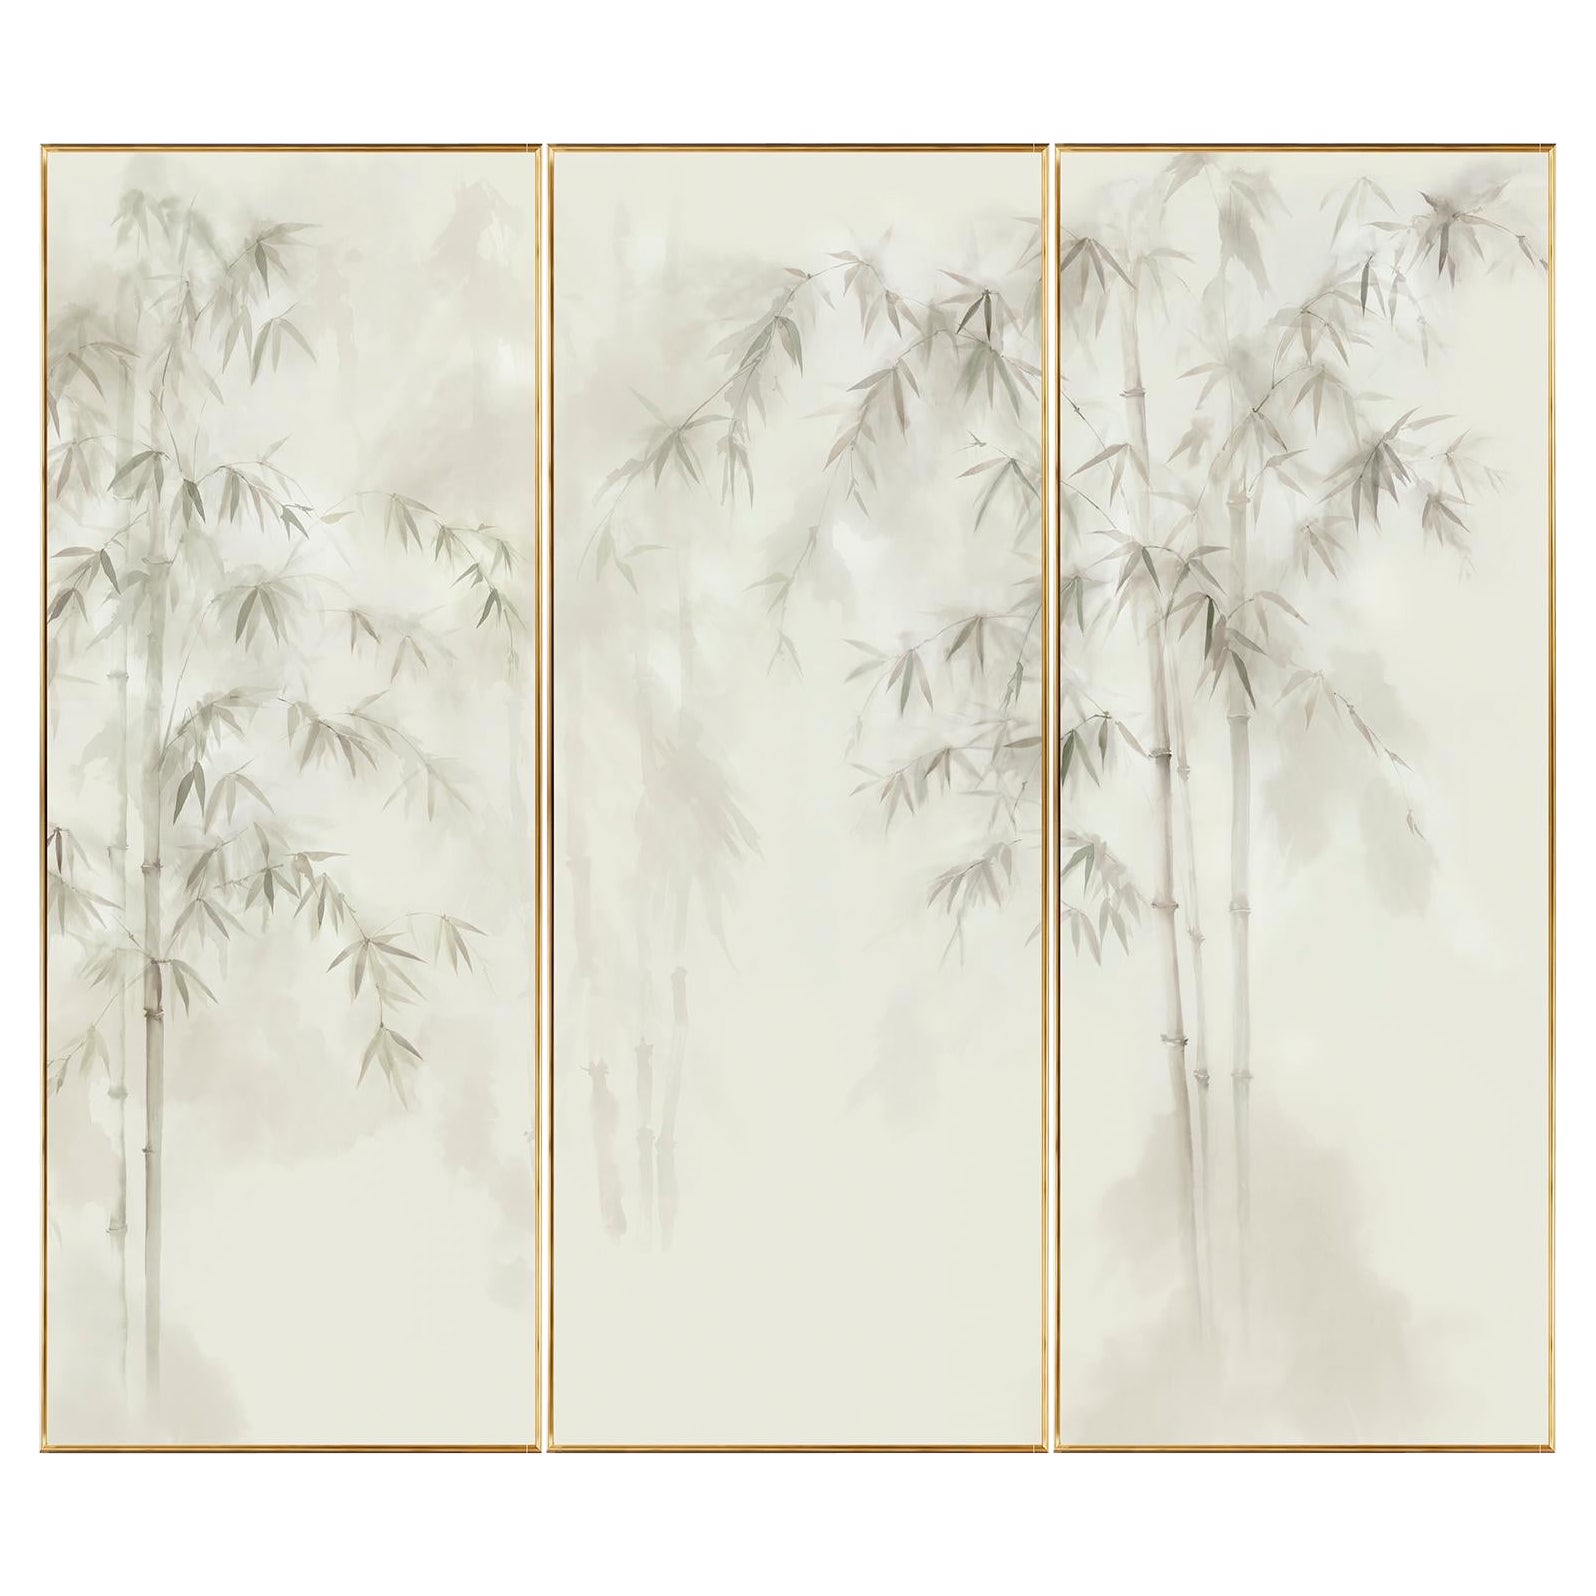 Handpainted Wallpaper "Bamboo Forest", Set of Three